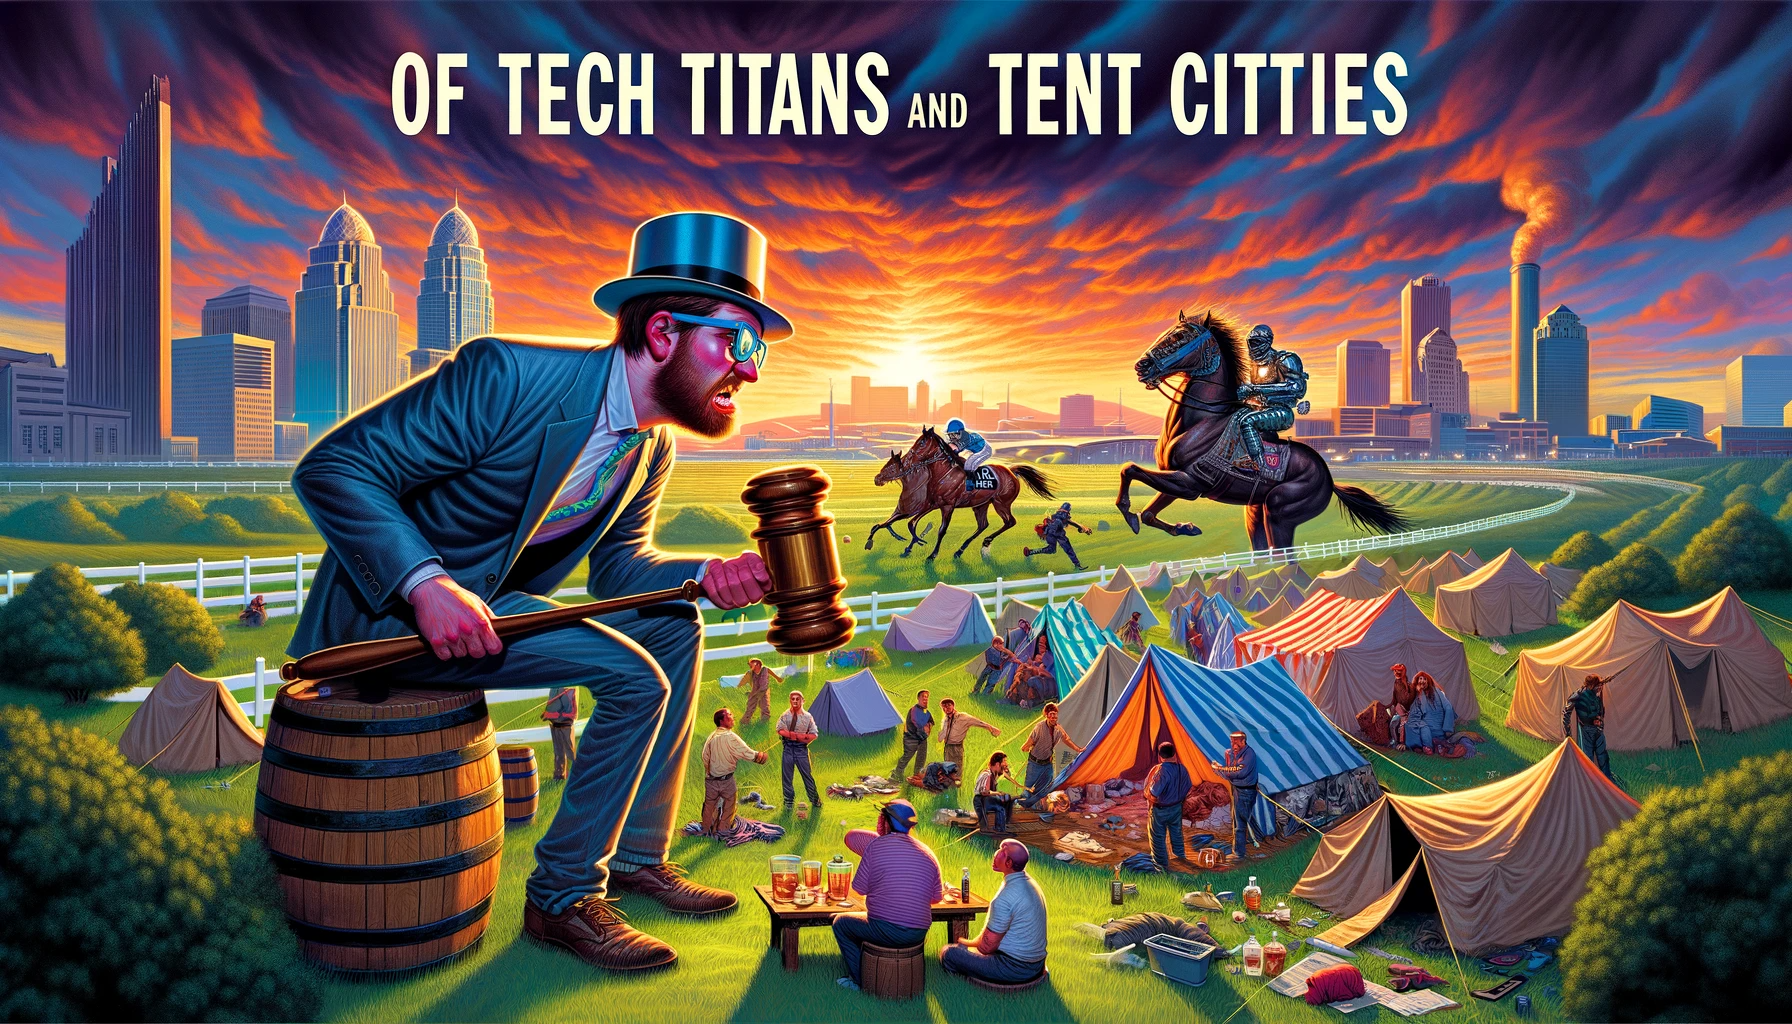 Of Tech Titans and Tent Cities: A Gonzo Gaze at HB5, "The Great Kentucky Campout Prohibition"